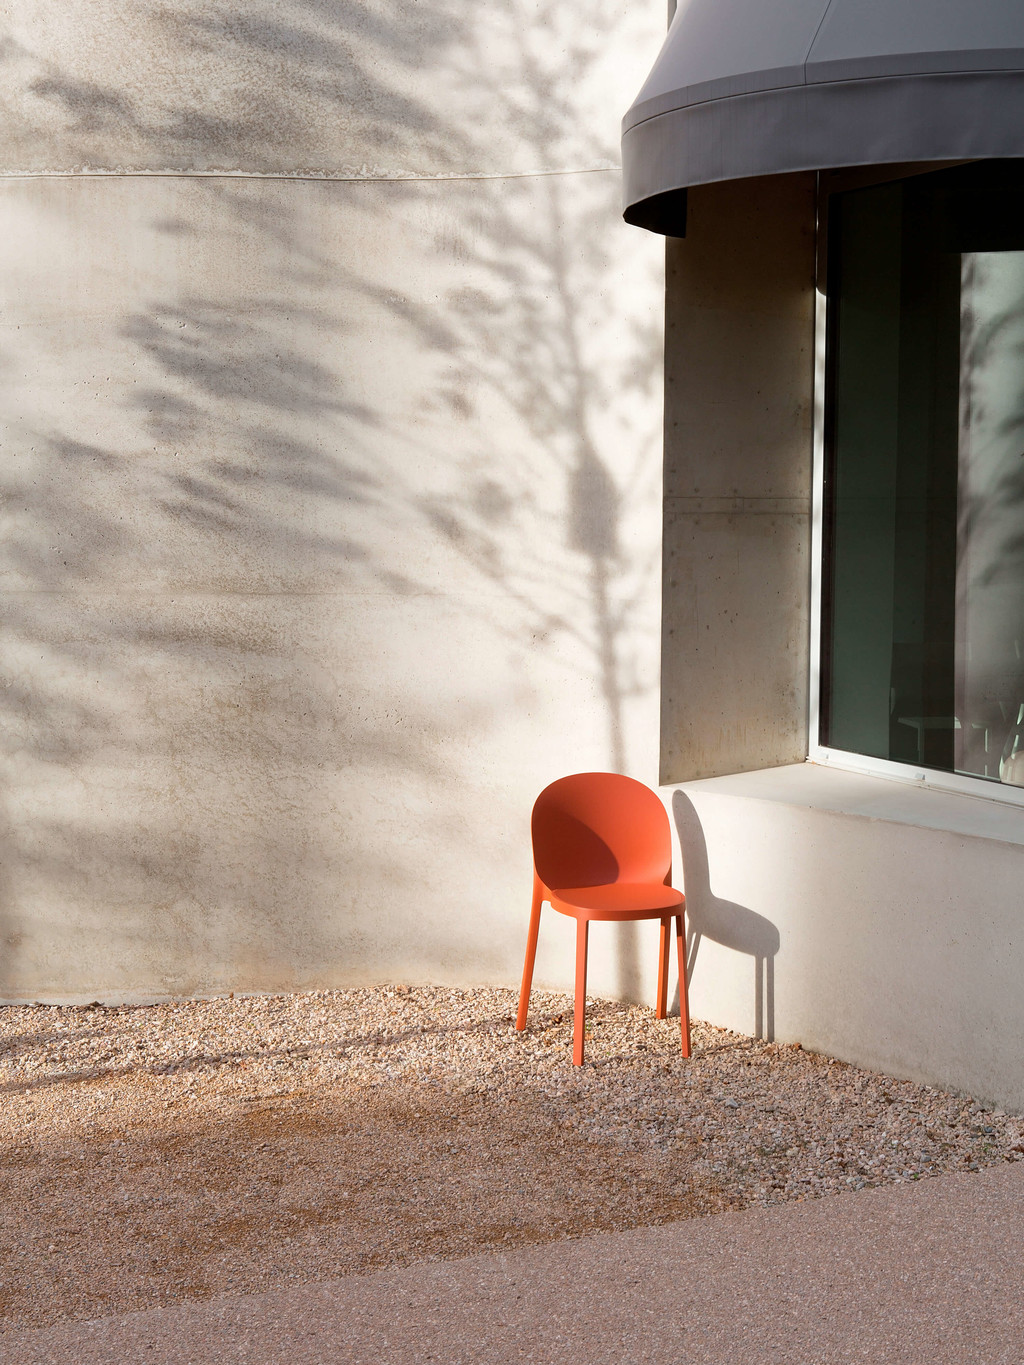 The Midi chair developed by Micael Filipe and Romain Viricel over a year of almost daily conversation between London and Lyon - © Photograph: Filipe & Viricel, Swiss Design Awards Blog